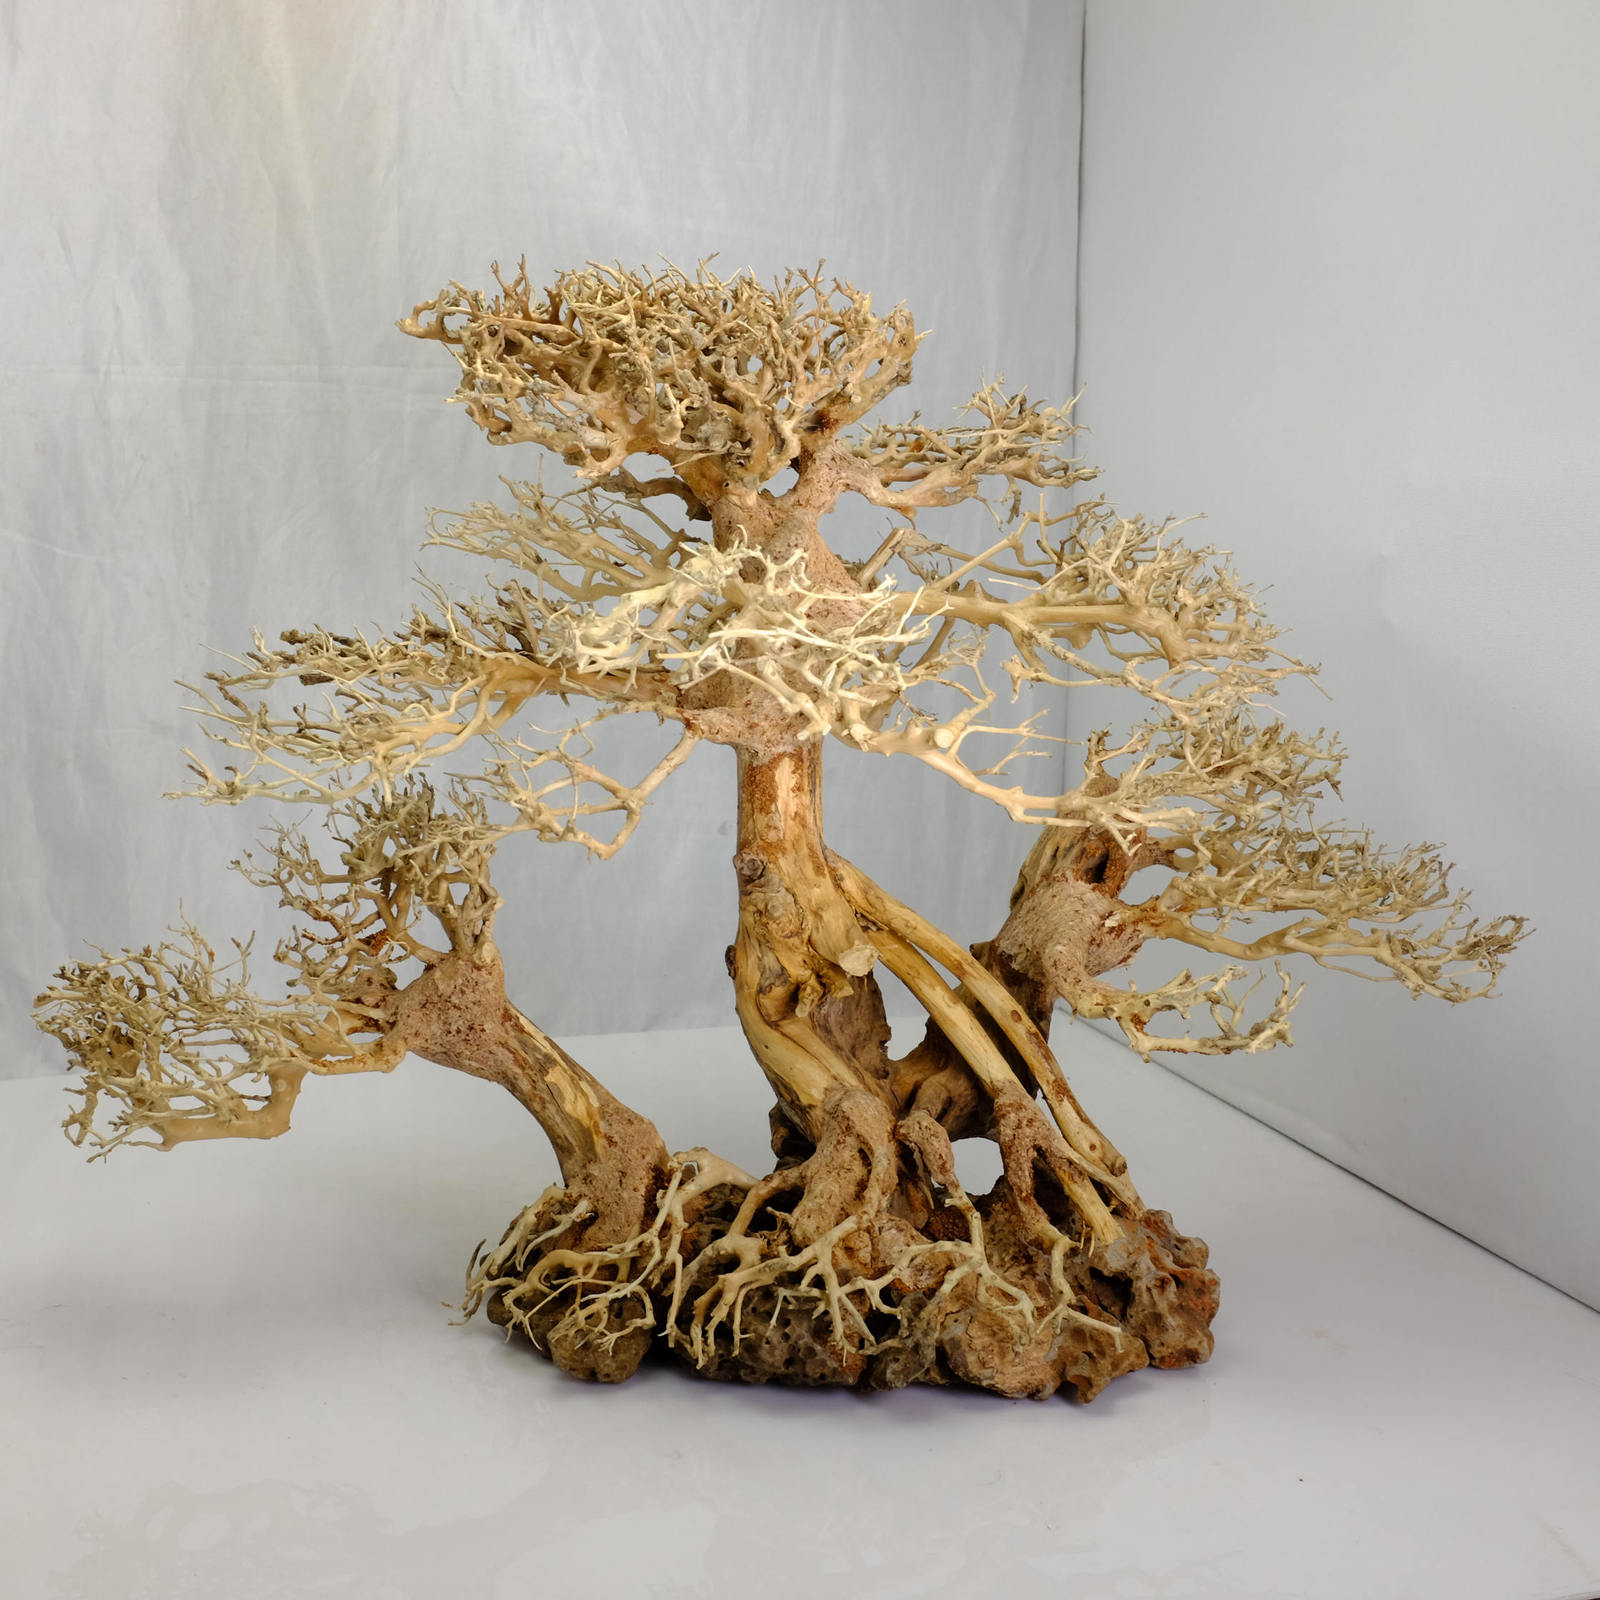  Bonsai Tree Moss of all time Check it out now 